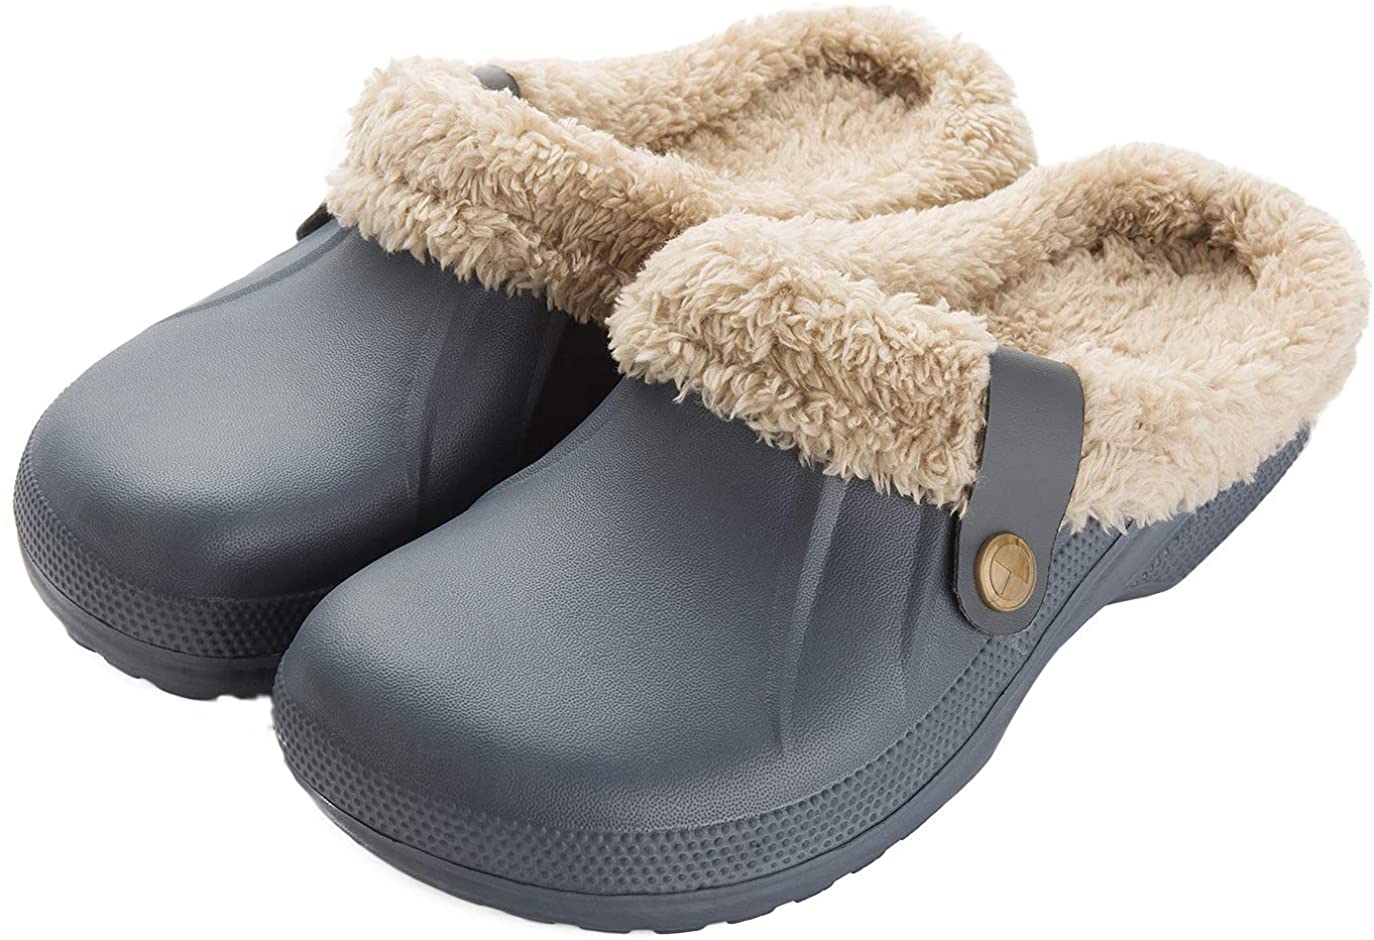 Mens Fur Lined Garden Clogs Slip On Winter Warm Sandals Slippers Indoor Close To 